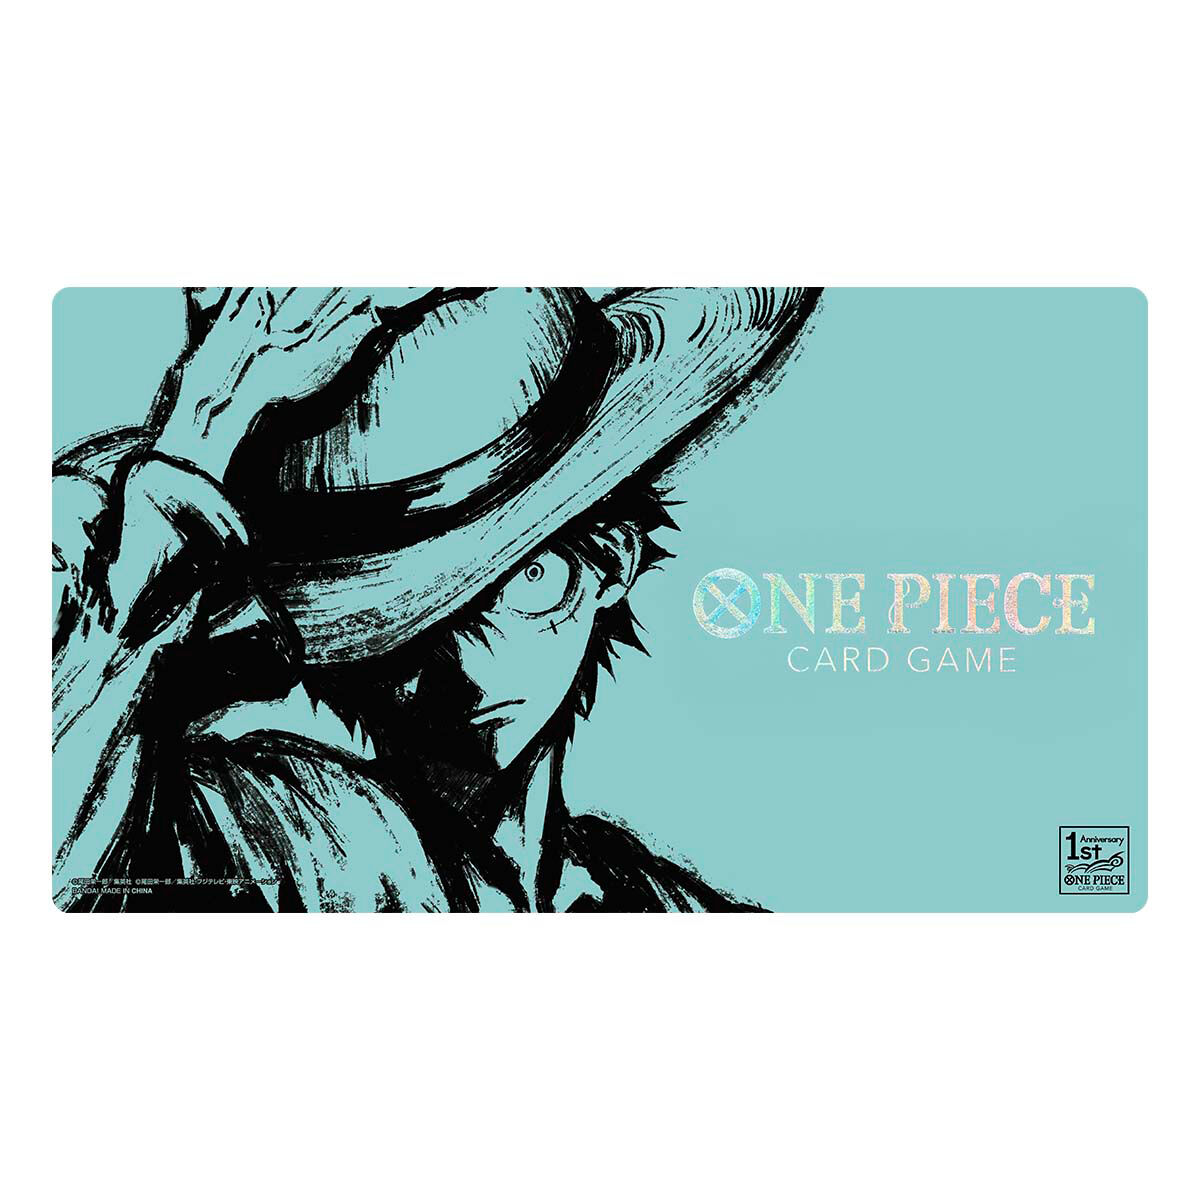 ONE PIECE CARD GAME\n1st ANNIVERSARY SET